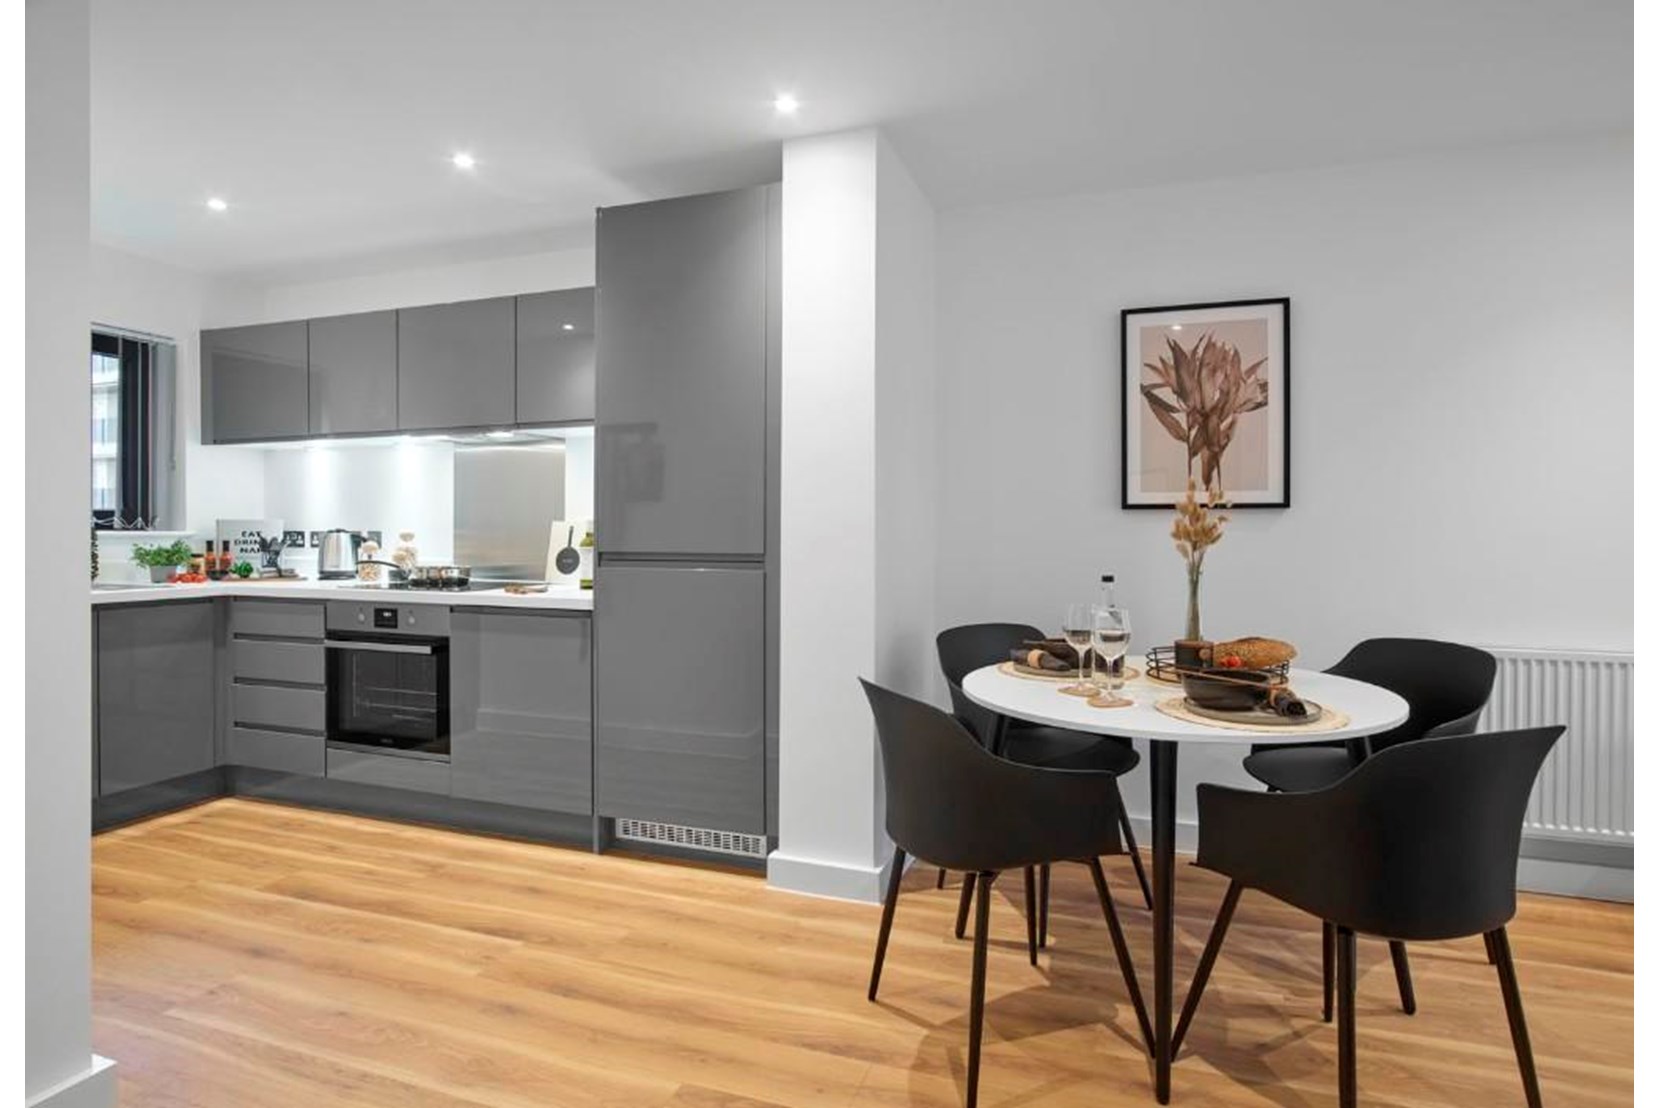 Apartments to Rent by Savills at The Picture House, Redbridge, IG1, dining kitchen area